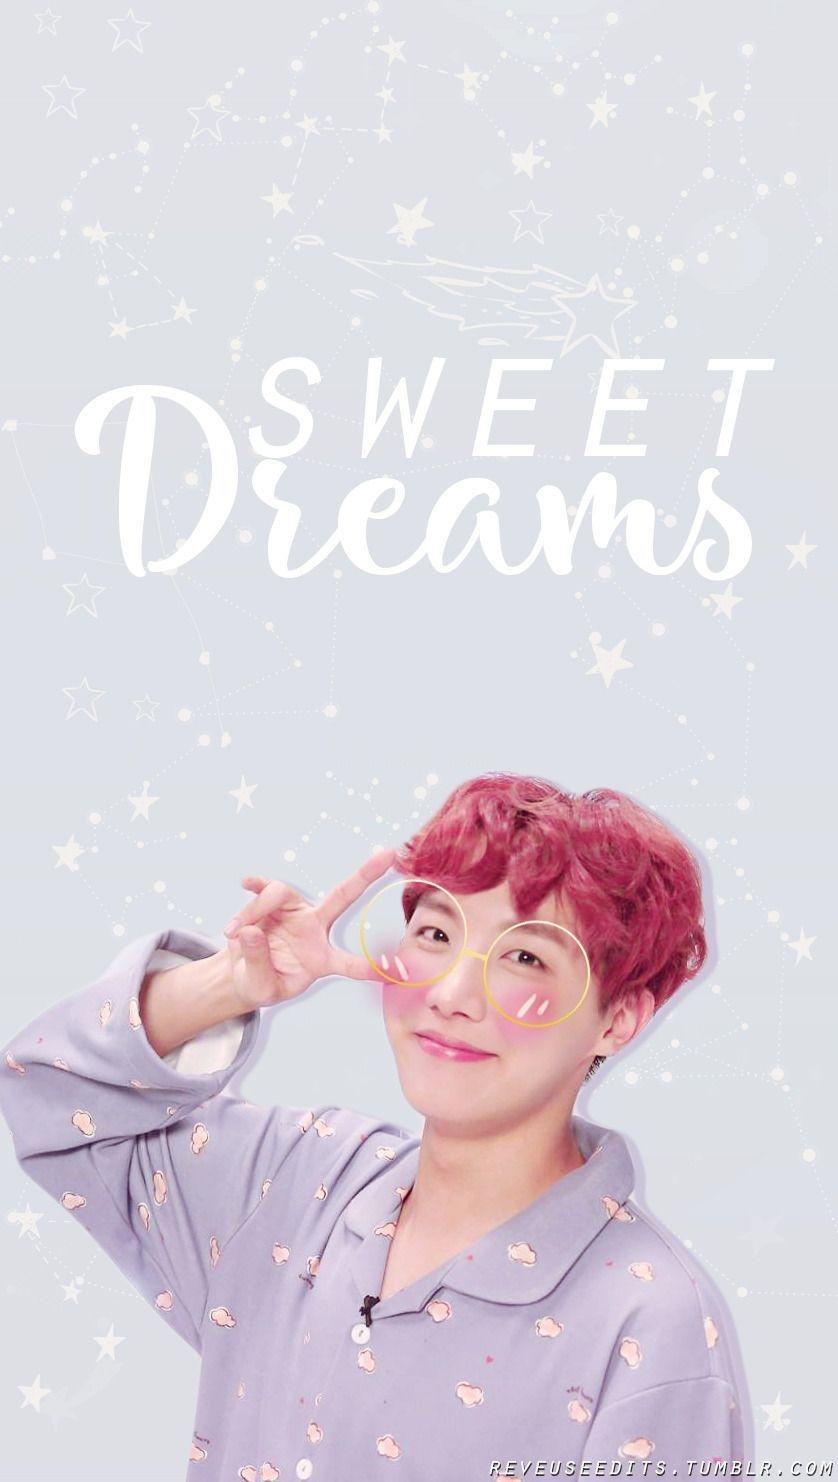 Bts jhope aesthetic Wallpapers Download | MobCup